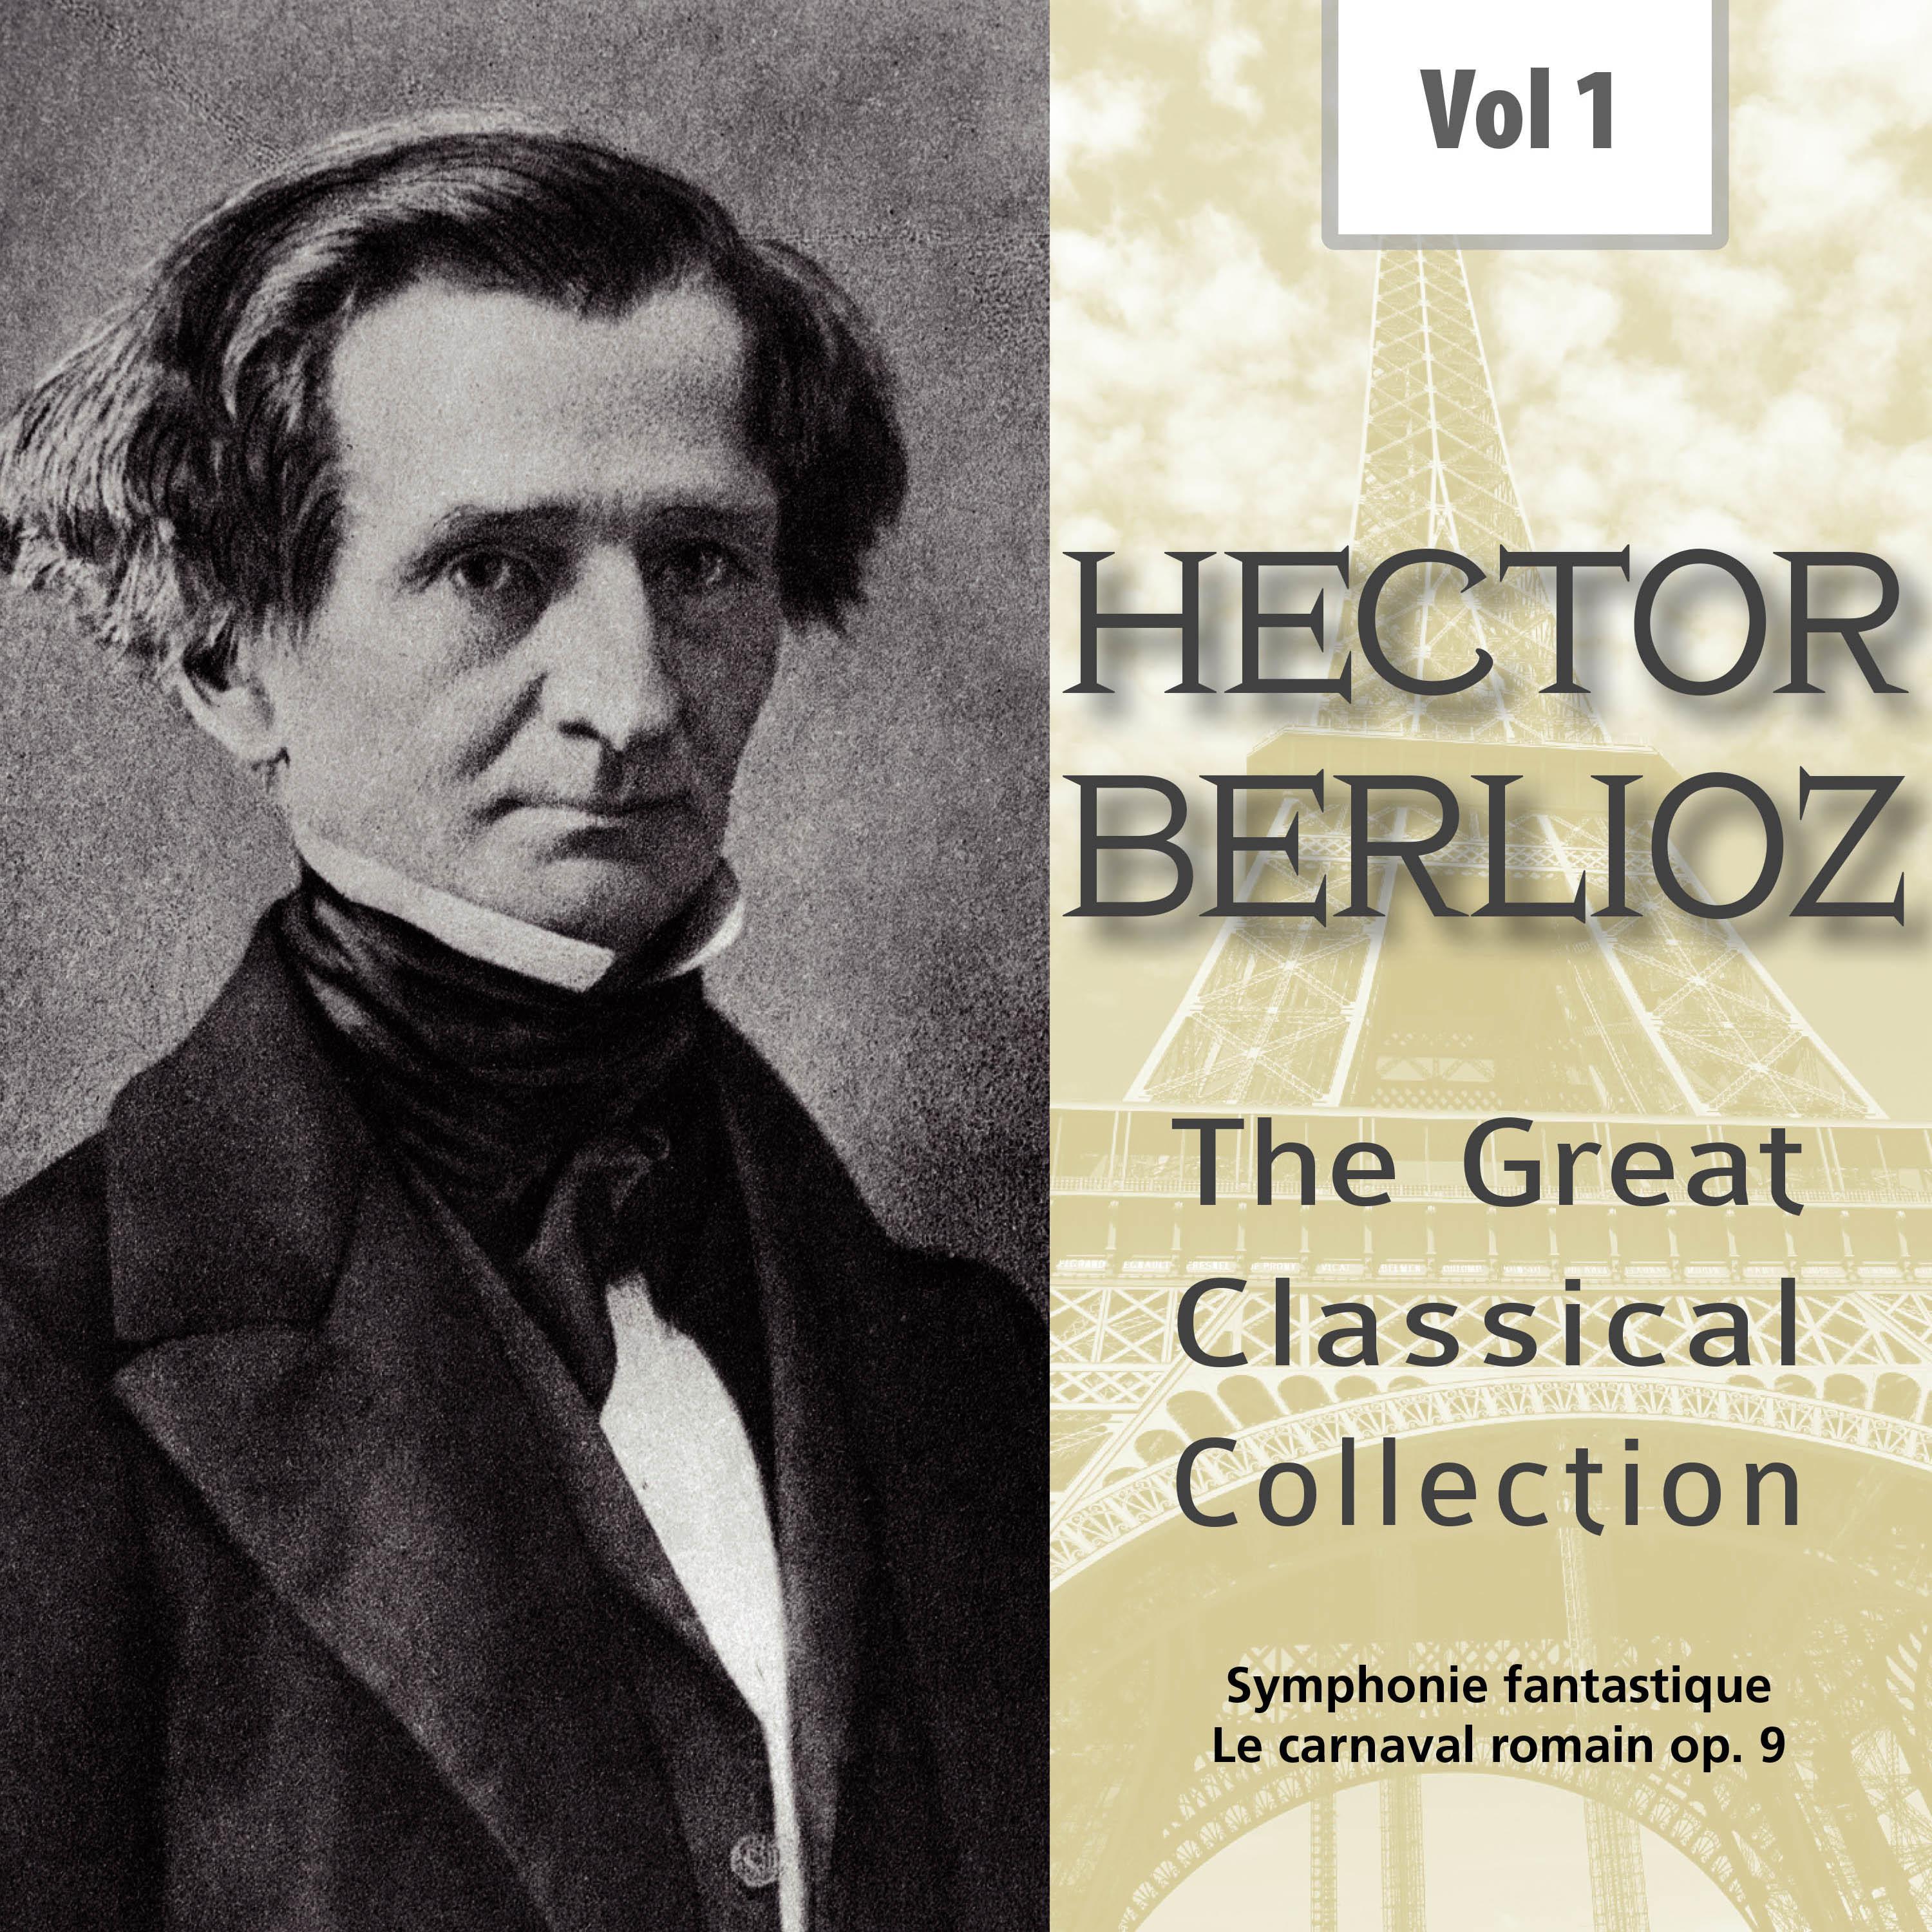 Hector Berlioz - The Great Classical Collection, Vol. 1